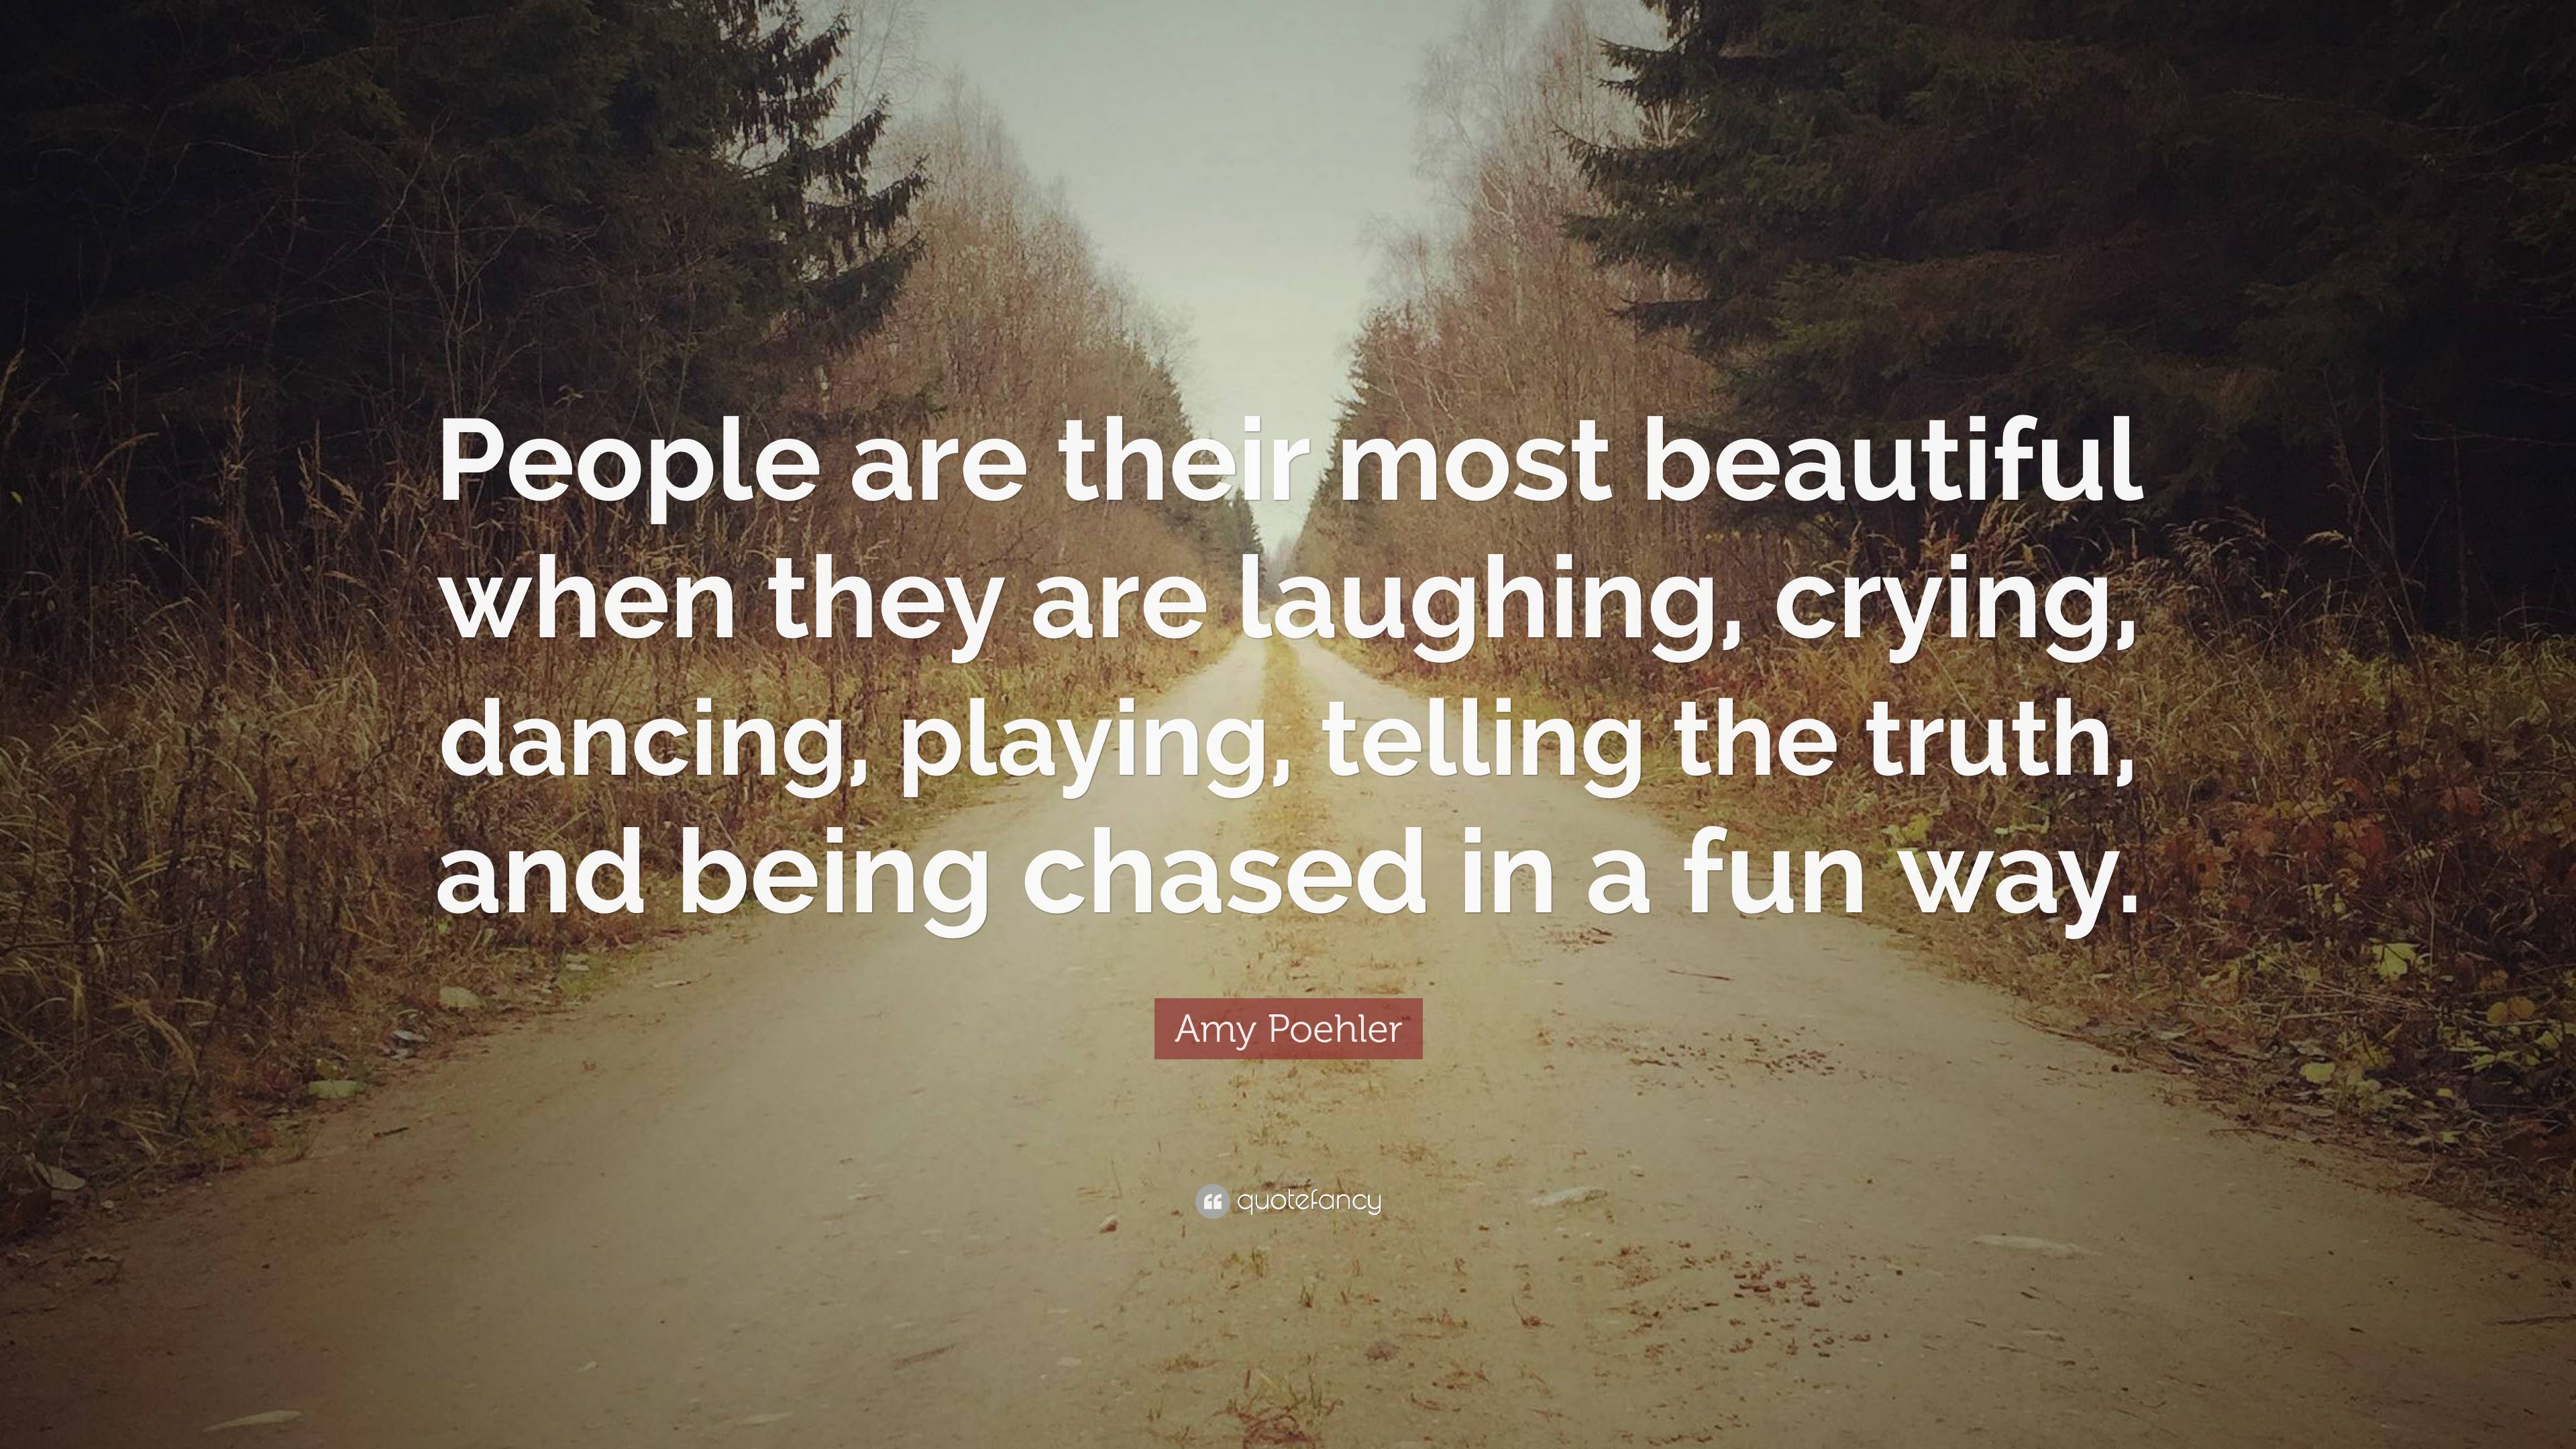 Amy Poehler Quote “people Are Their Most Beautiful When They Are Laughing Crying Dancing 0163